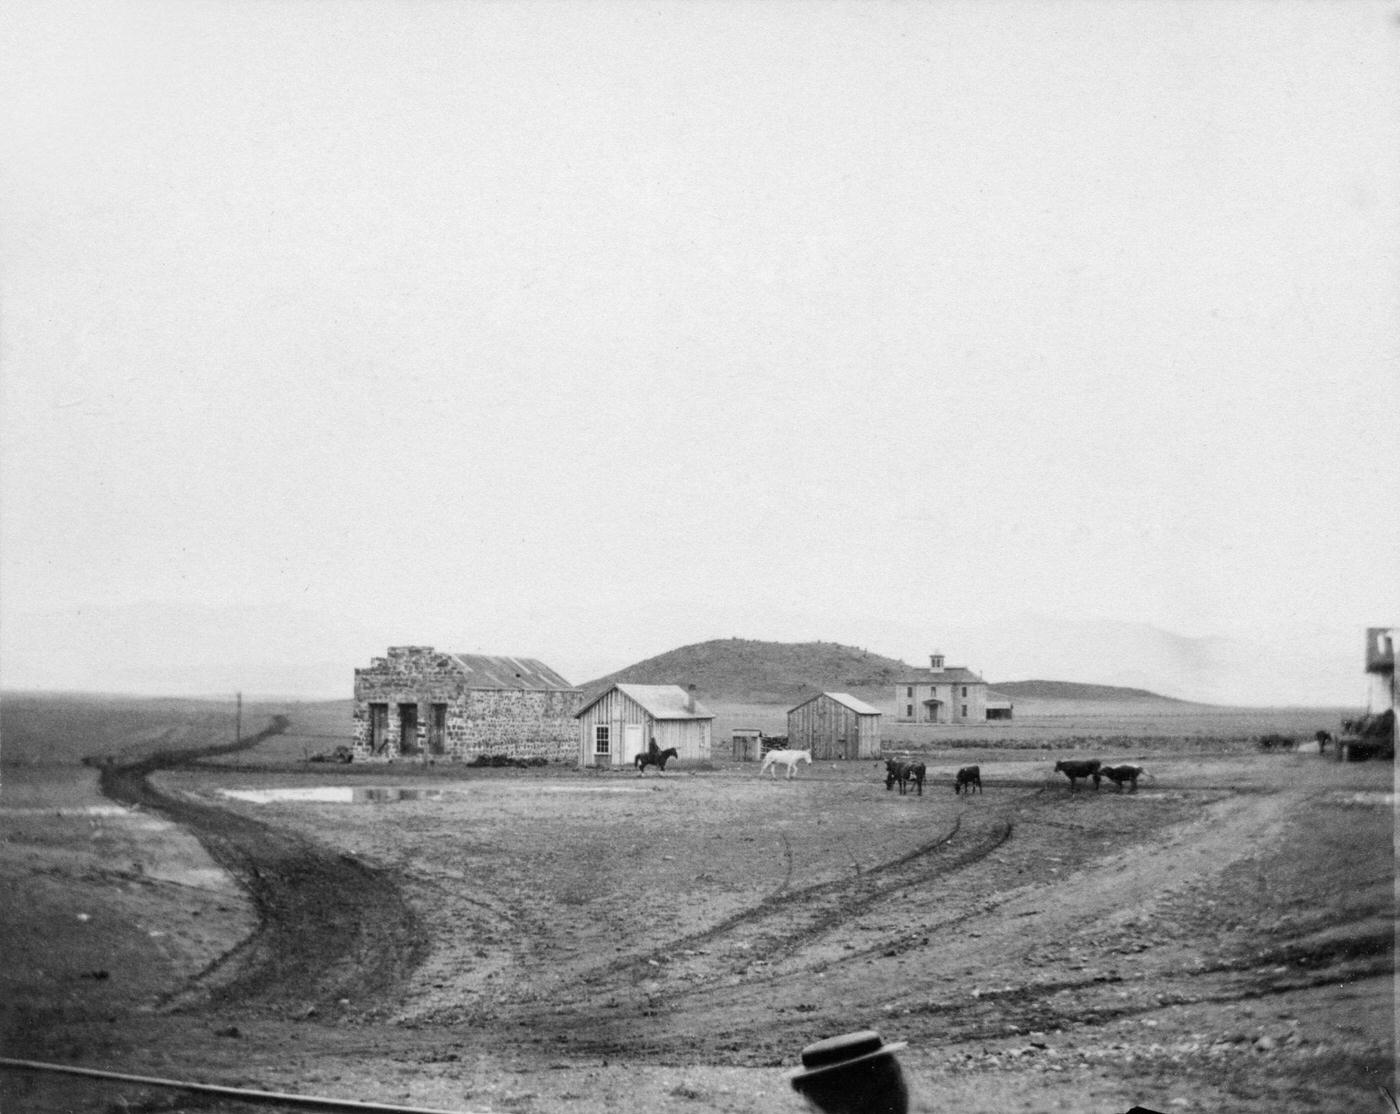 On The Plains, view of a handful of buildings, in a small frontier town on the Plains, during America's westward expansion era, nineteenth century.